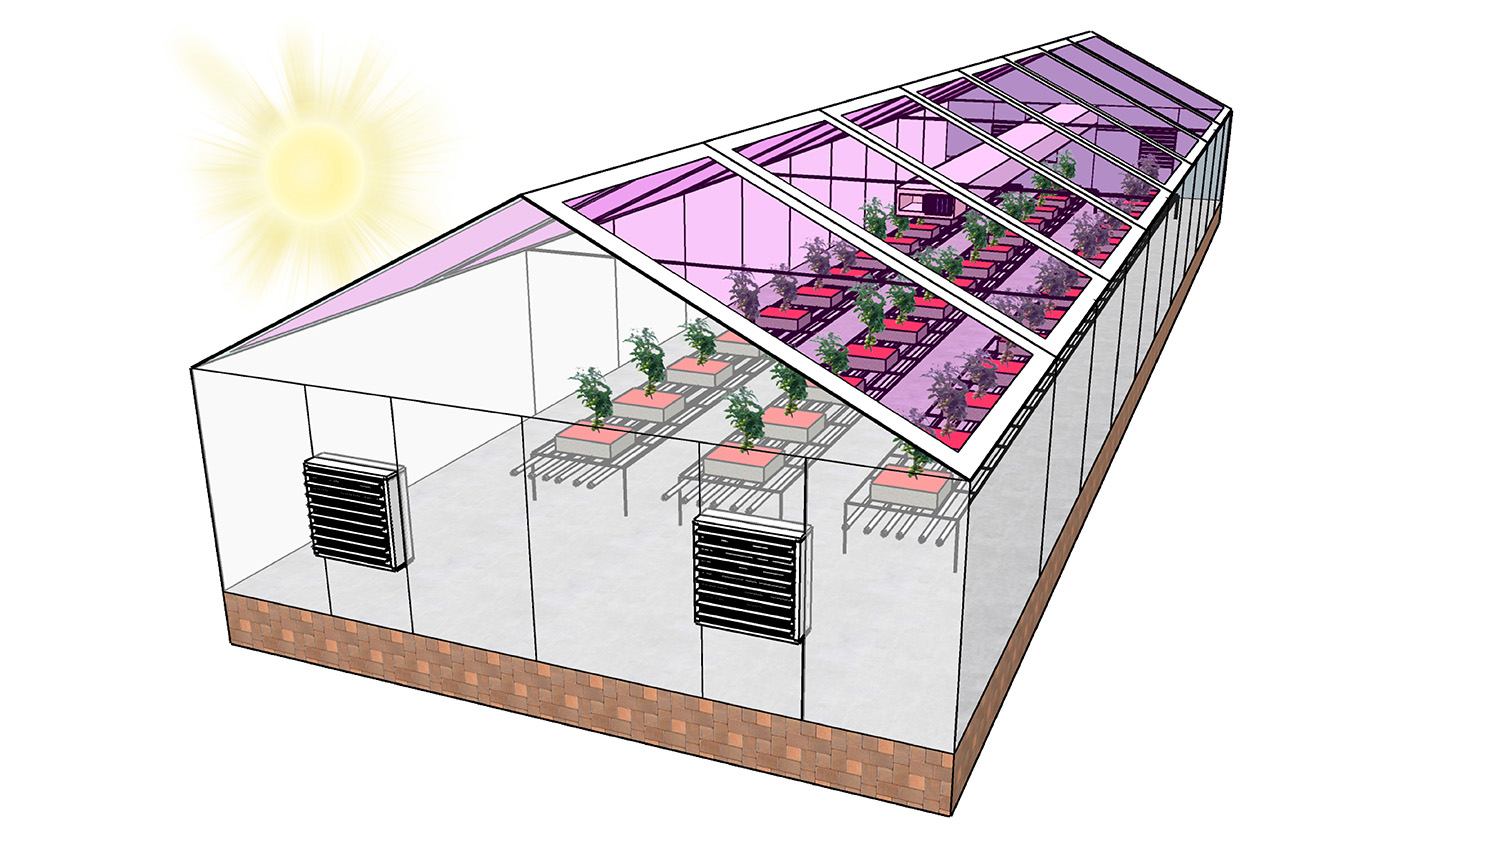 diagram of a greenhouse with translucent solar panels on the roof.